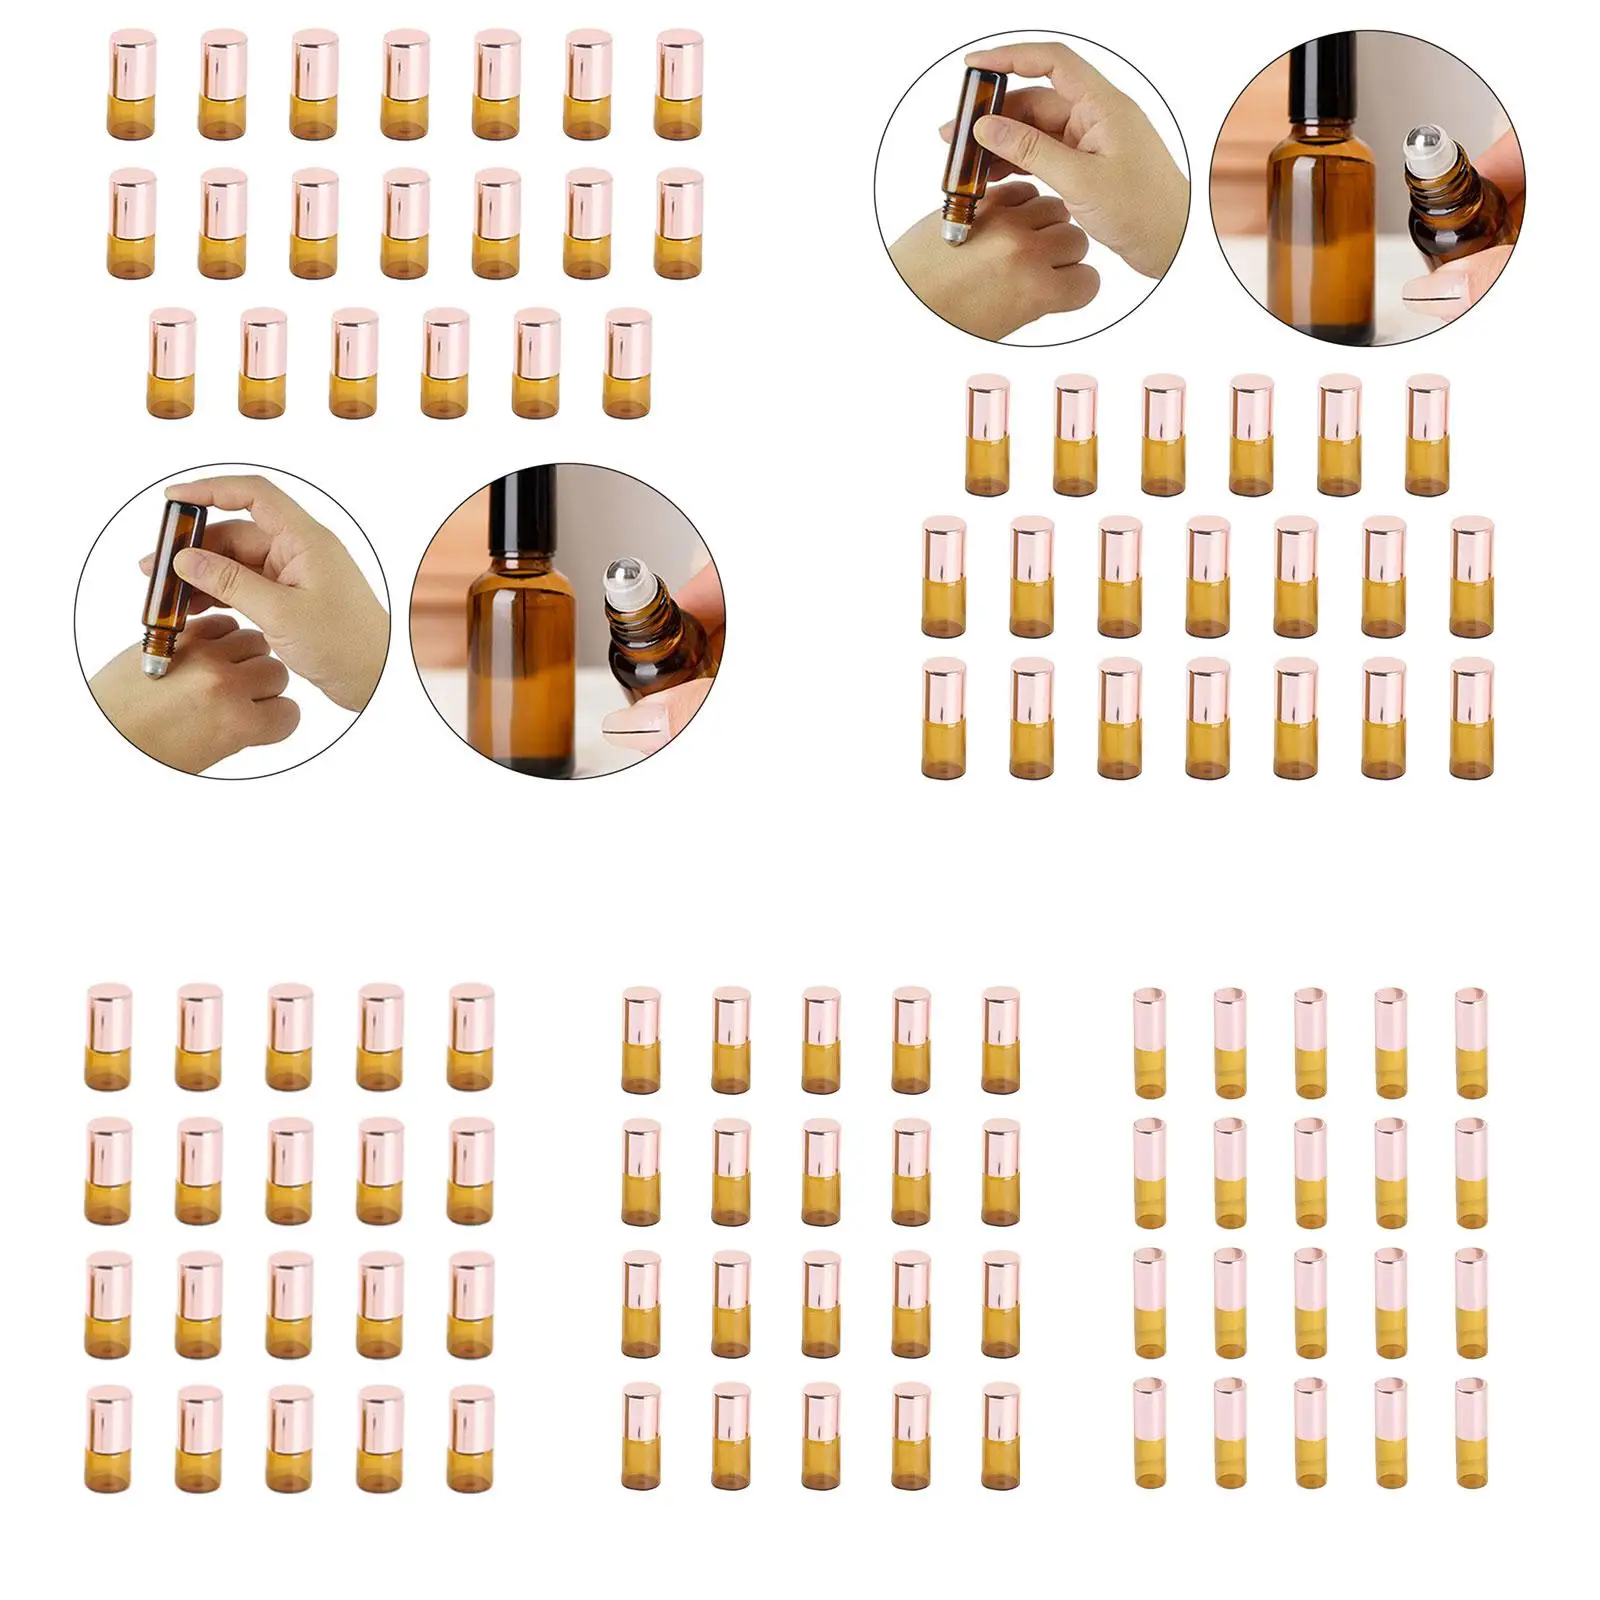 20 Pieces Empty Amber Glass Roller Ball Bottles Holder for Travel and Packing Smooth Rolling Metal Ball Portable Accessory